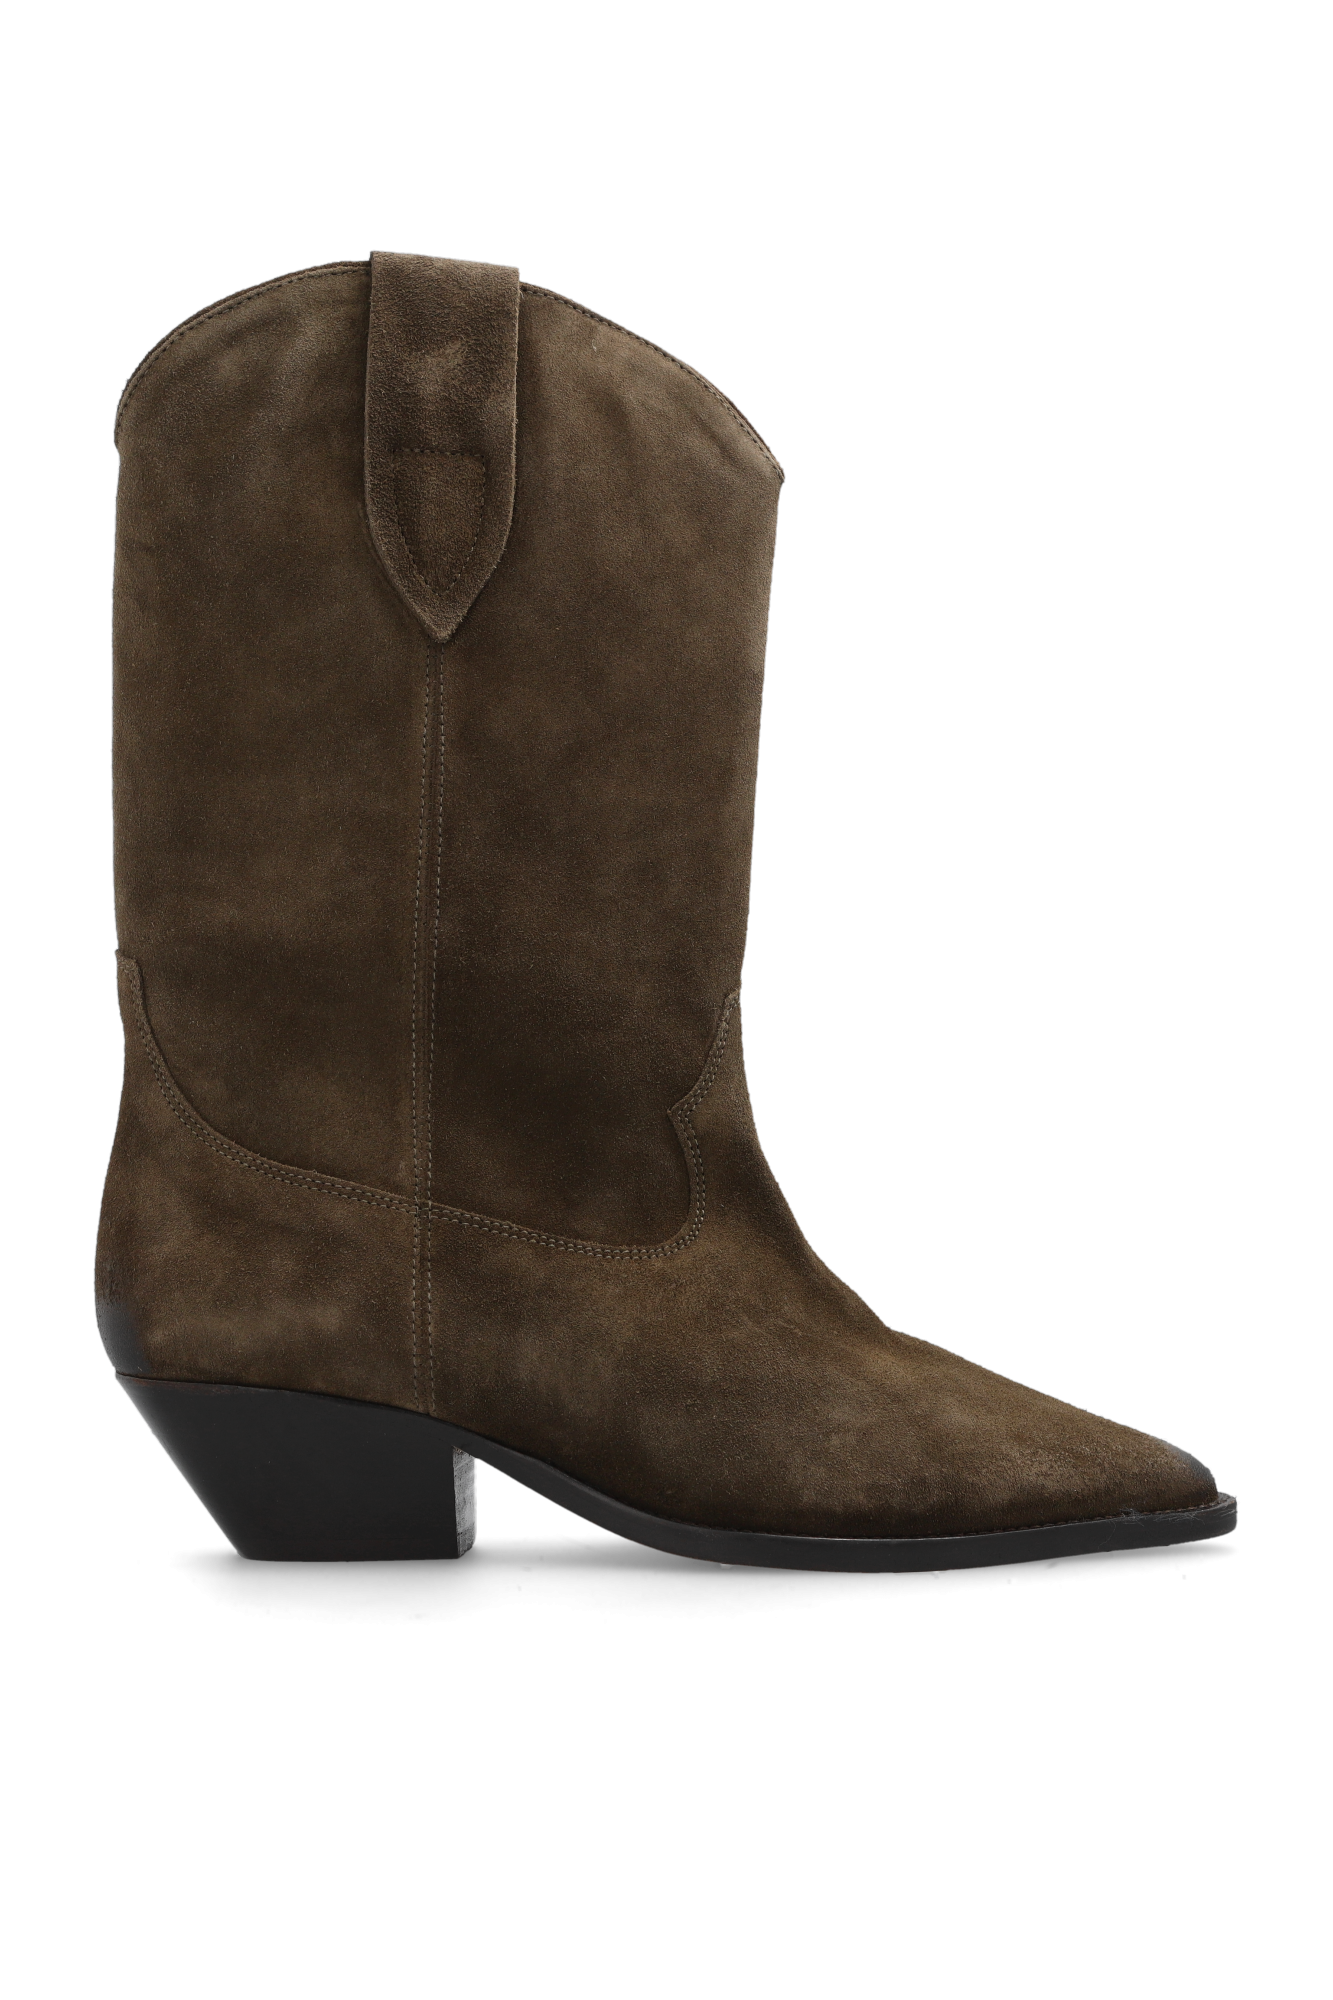 Isabel Marant ‘Duerto’ heeled knee-high ankle boots | Women's Shoes ...